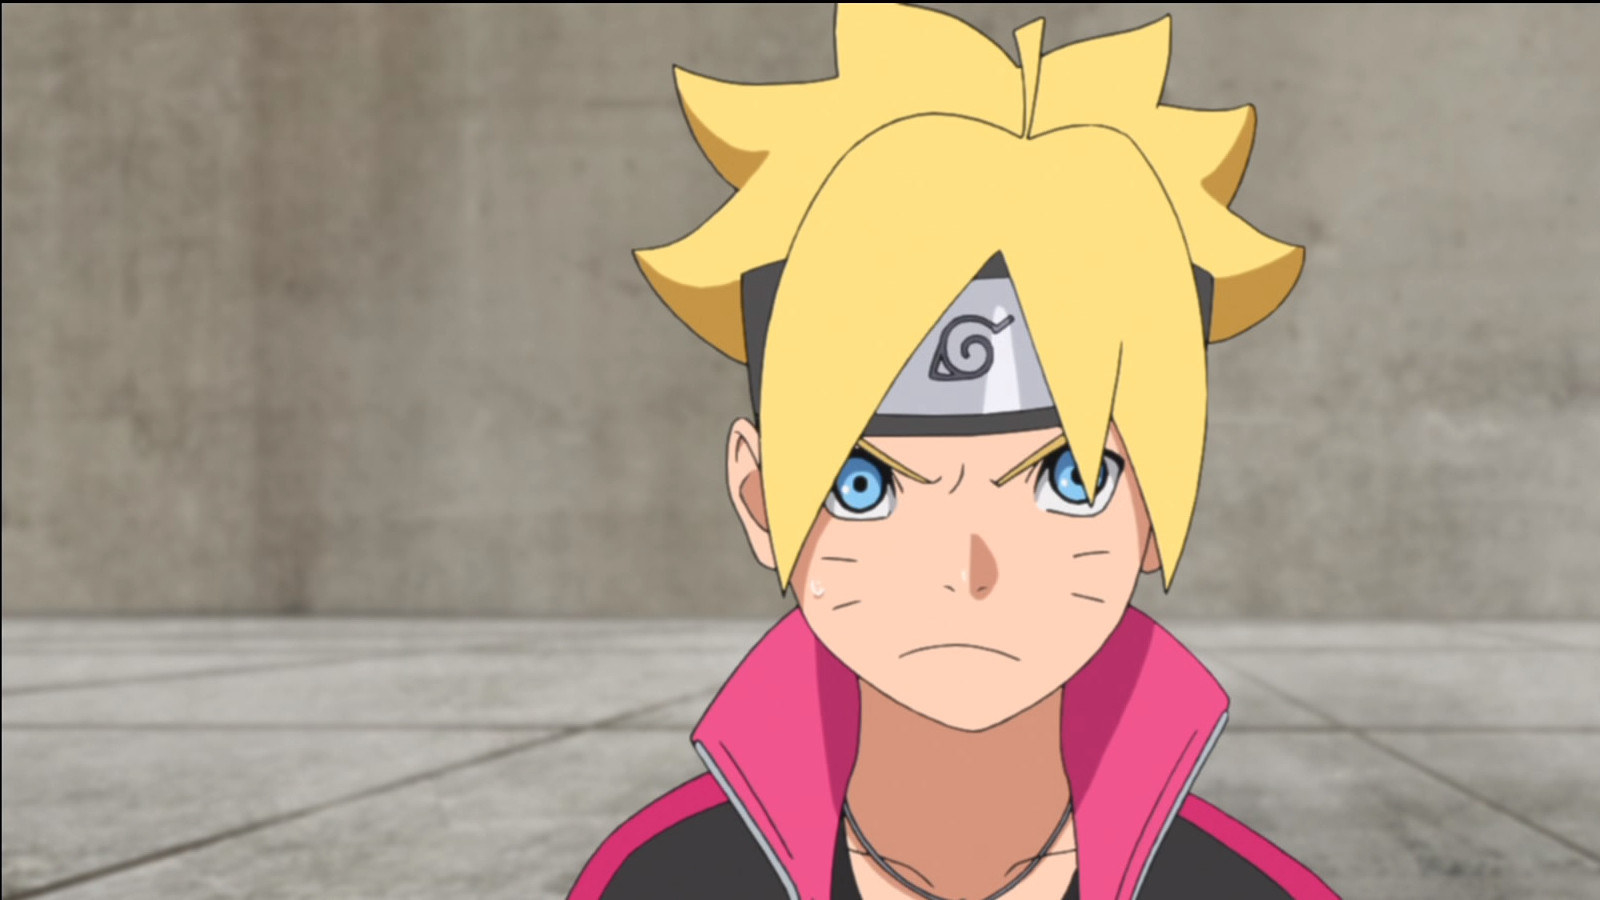 Boruto Part 2 leaks reveal disappointing details